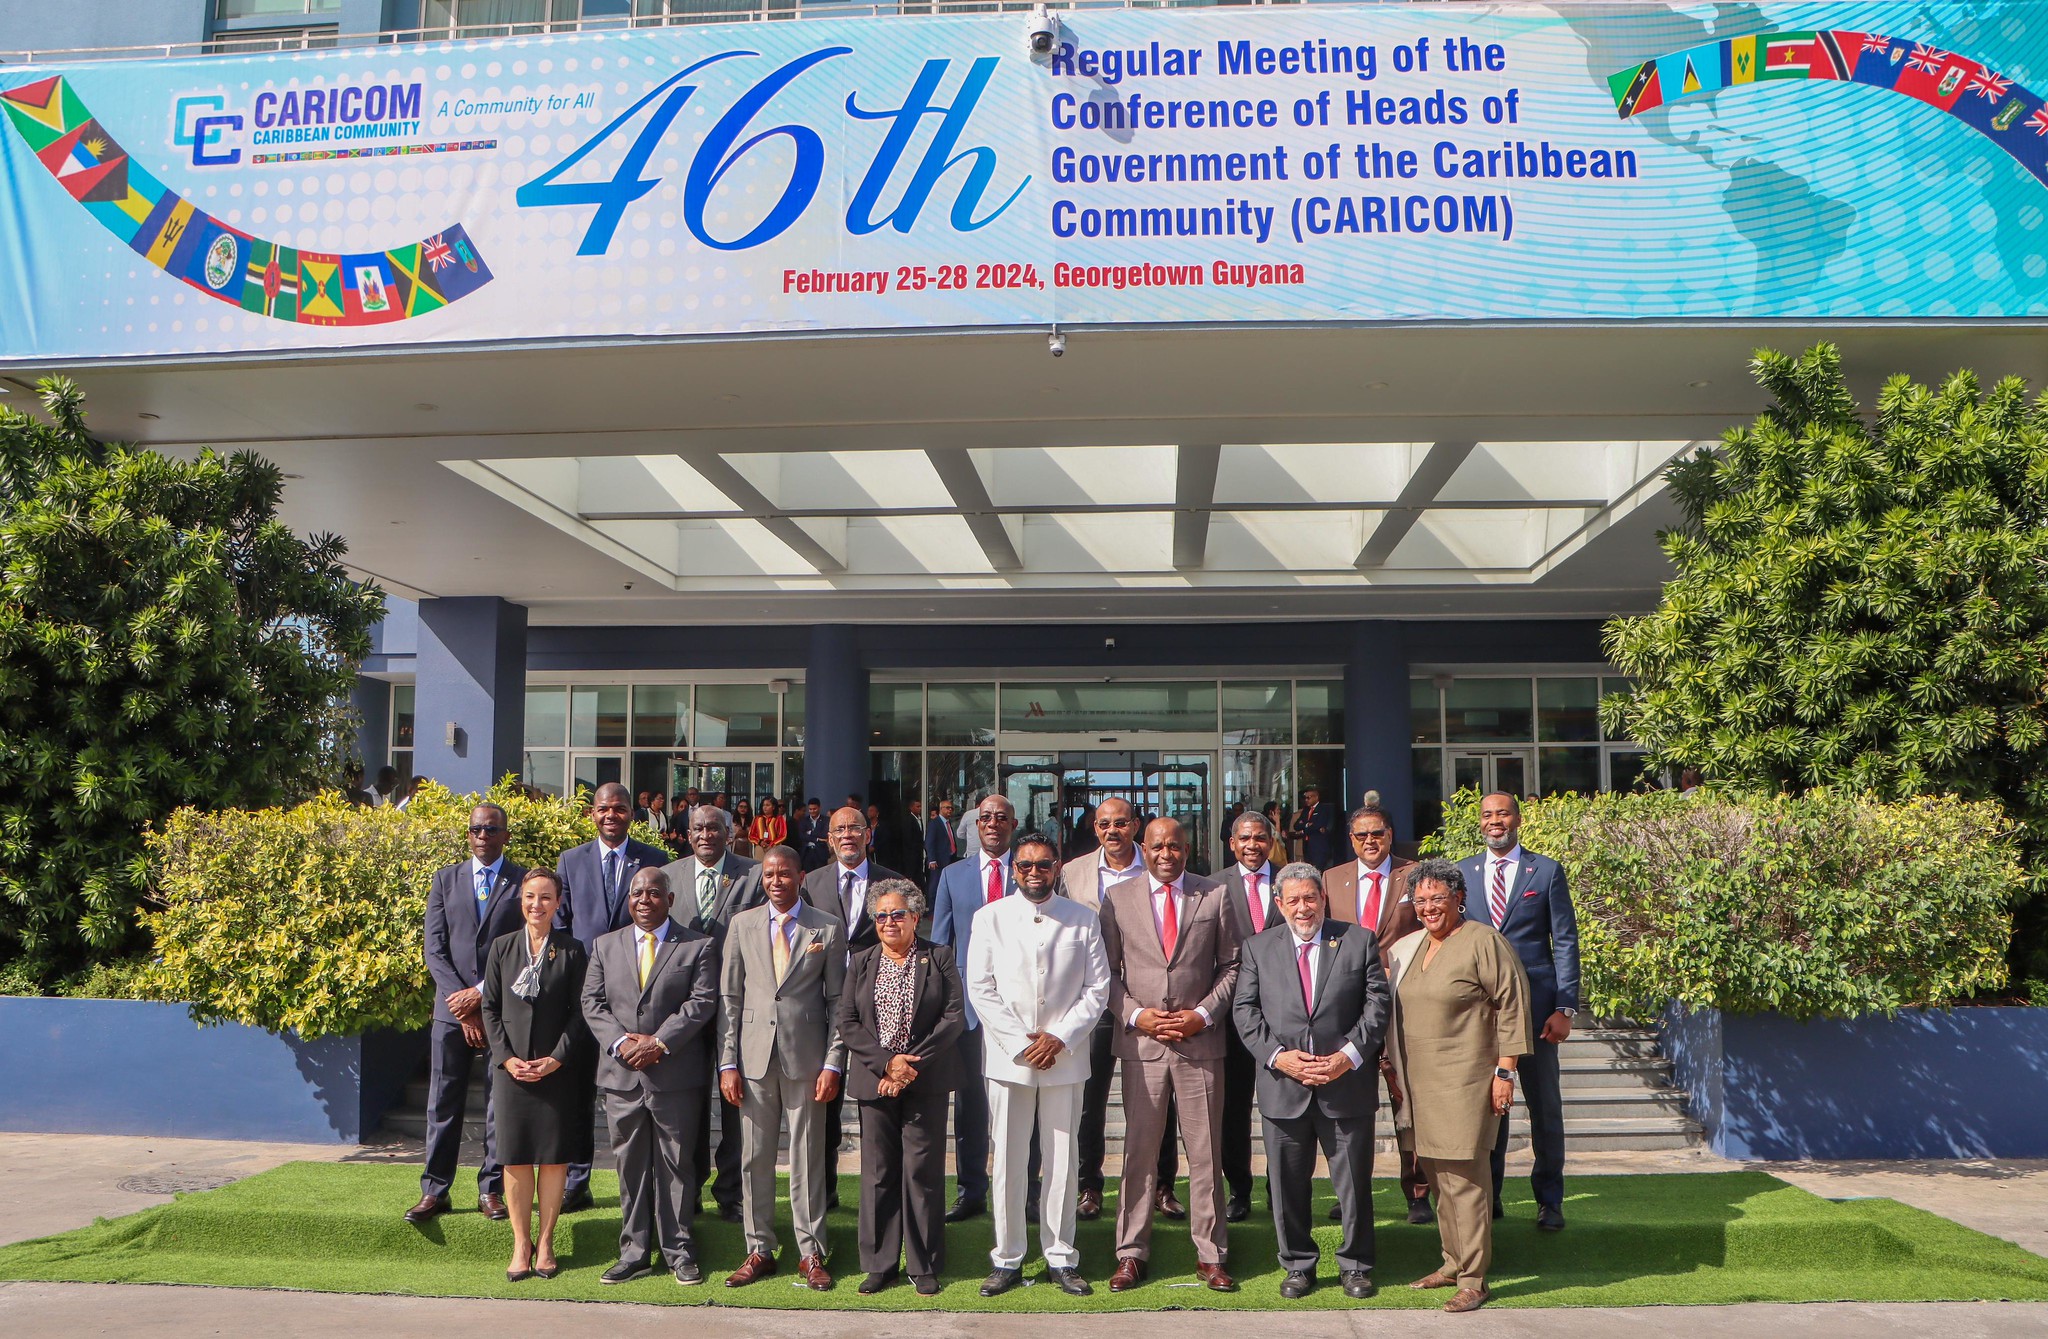 COMMUNIQUE: Issued at end of 46th regular meeting of conference of heads of government of CARICOM